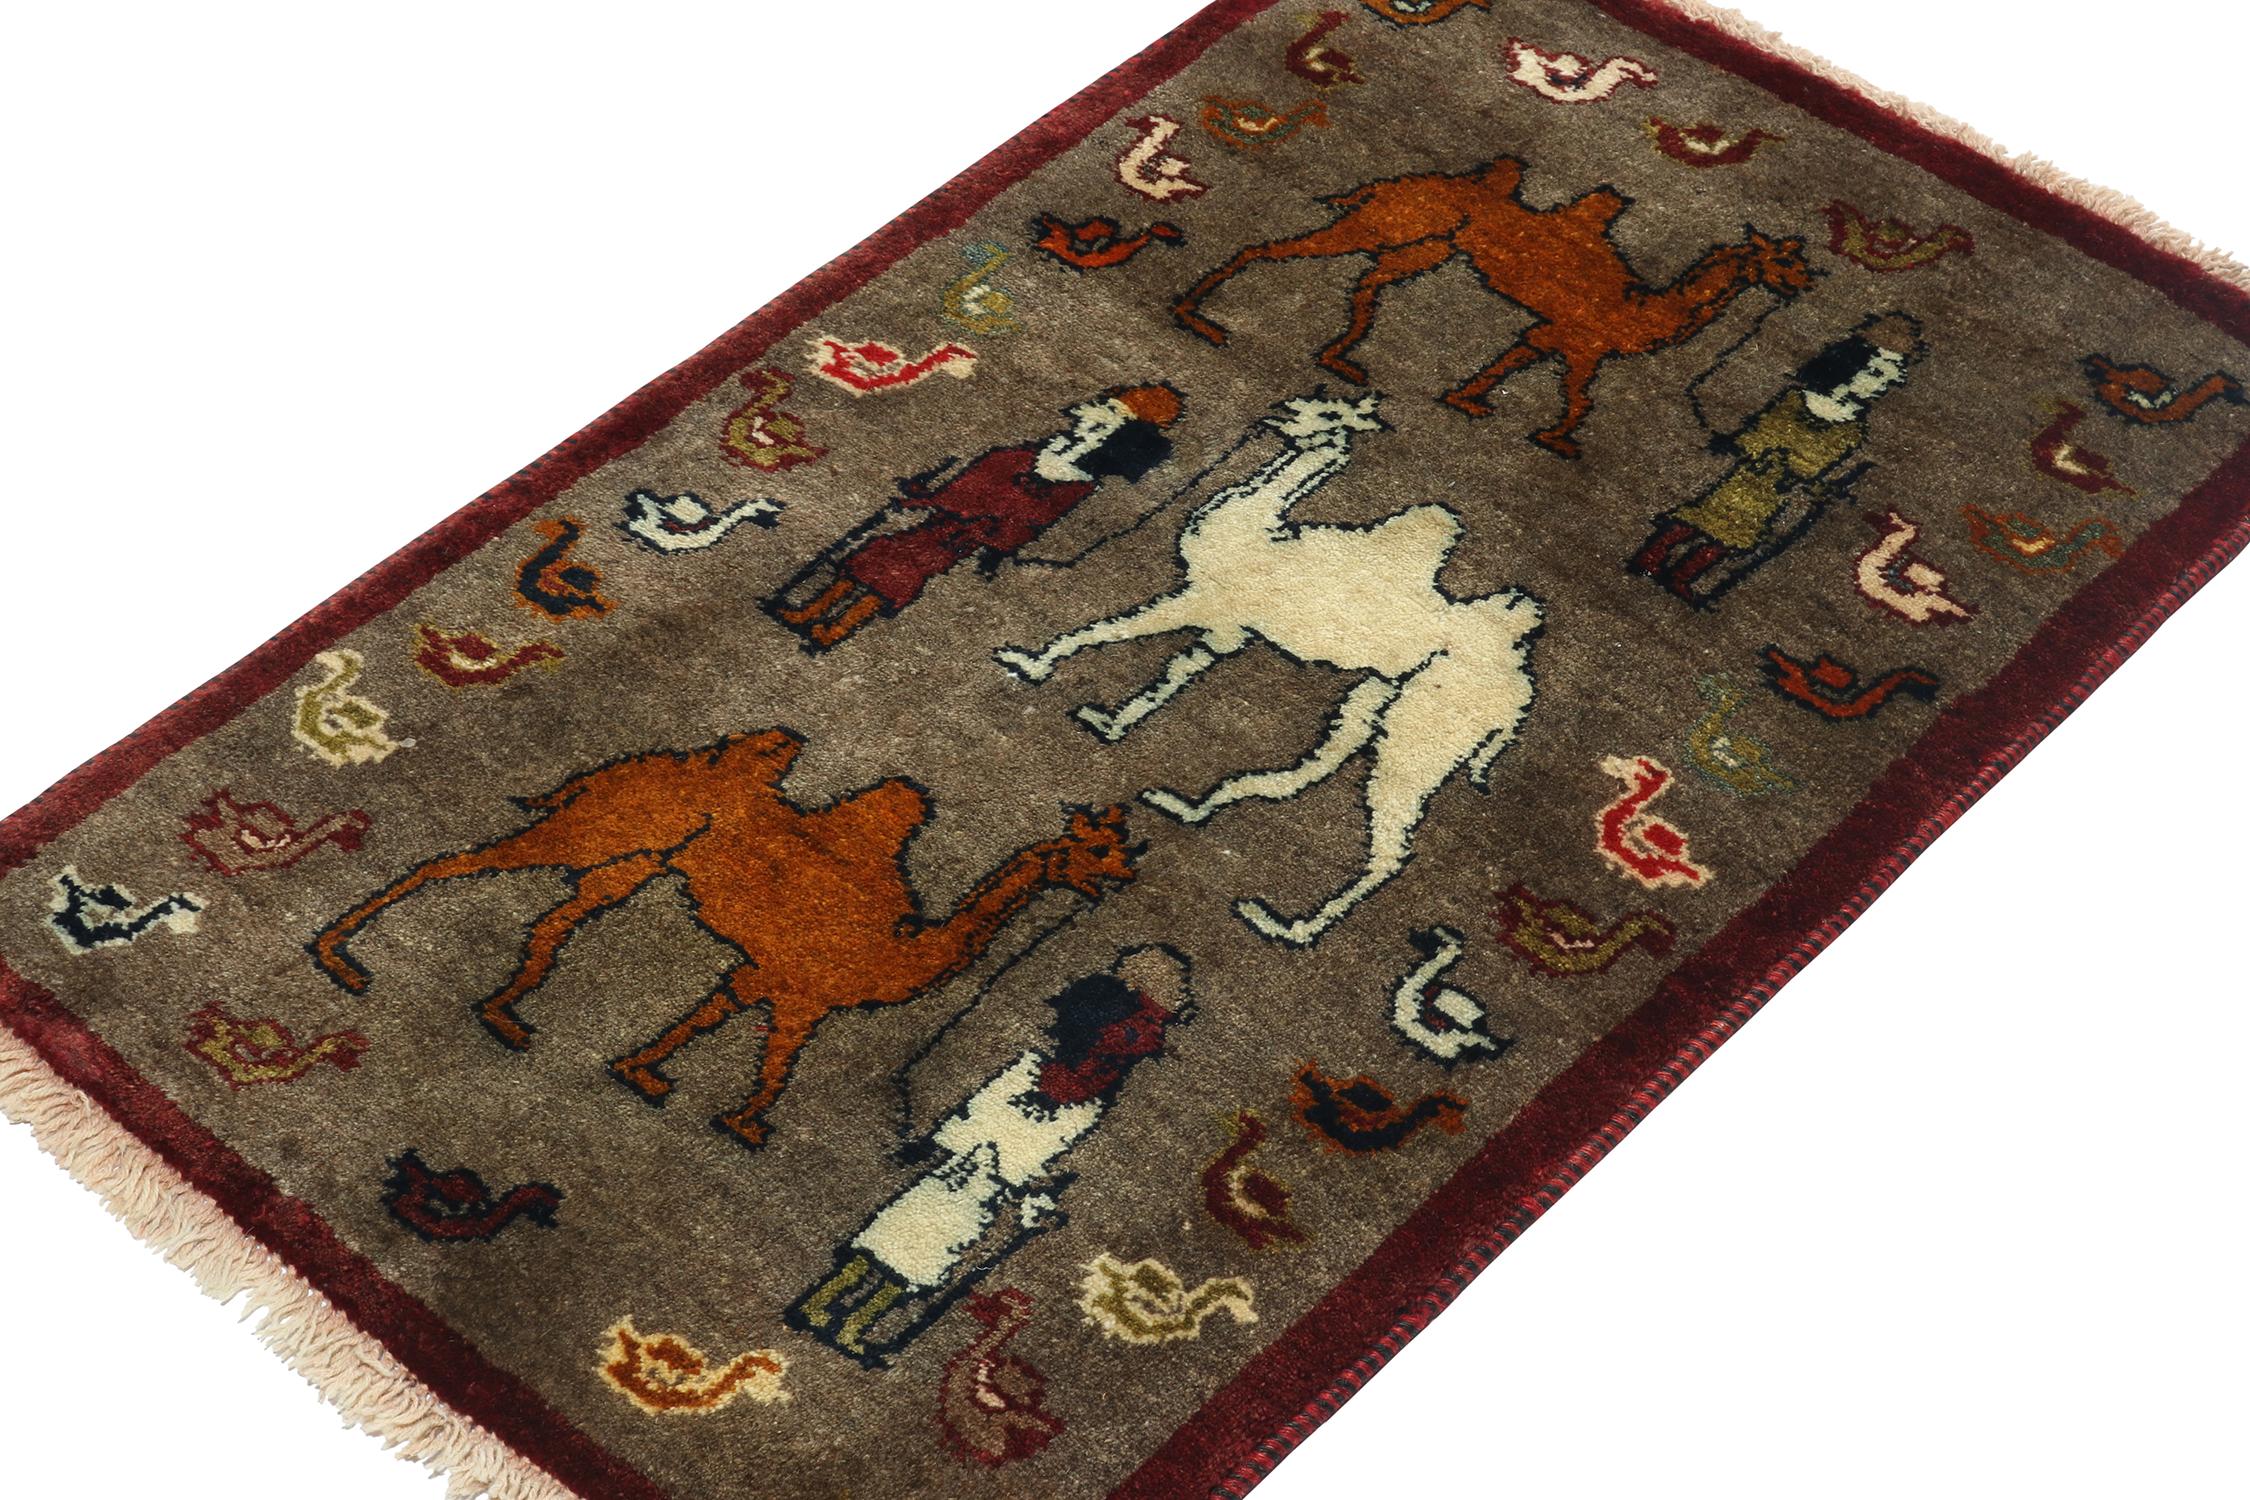 This vintage 2x4 Gabbeh Persian rug is from the latest entries in Rug & Kilim’s rare tribal curations. Hand-knotted in wool circa 1950-1960.

Further On the Design:

This tribal provenance is one of the most primitive, and collectible